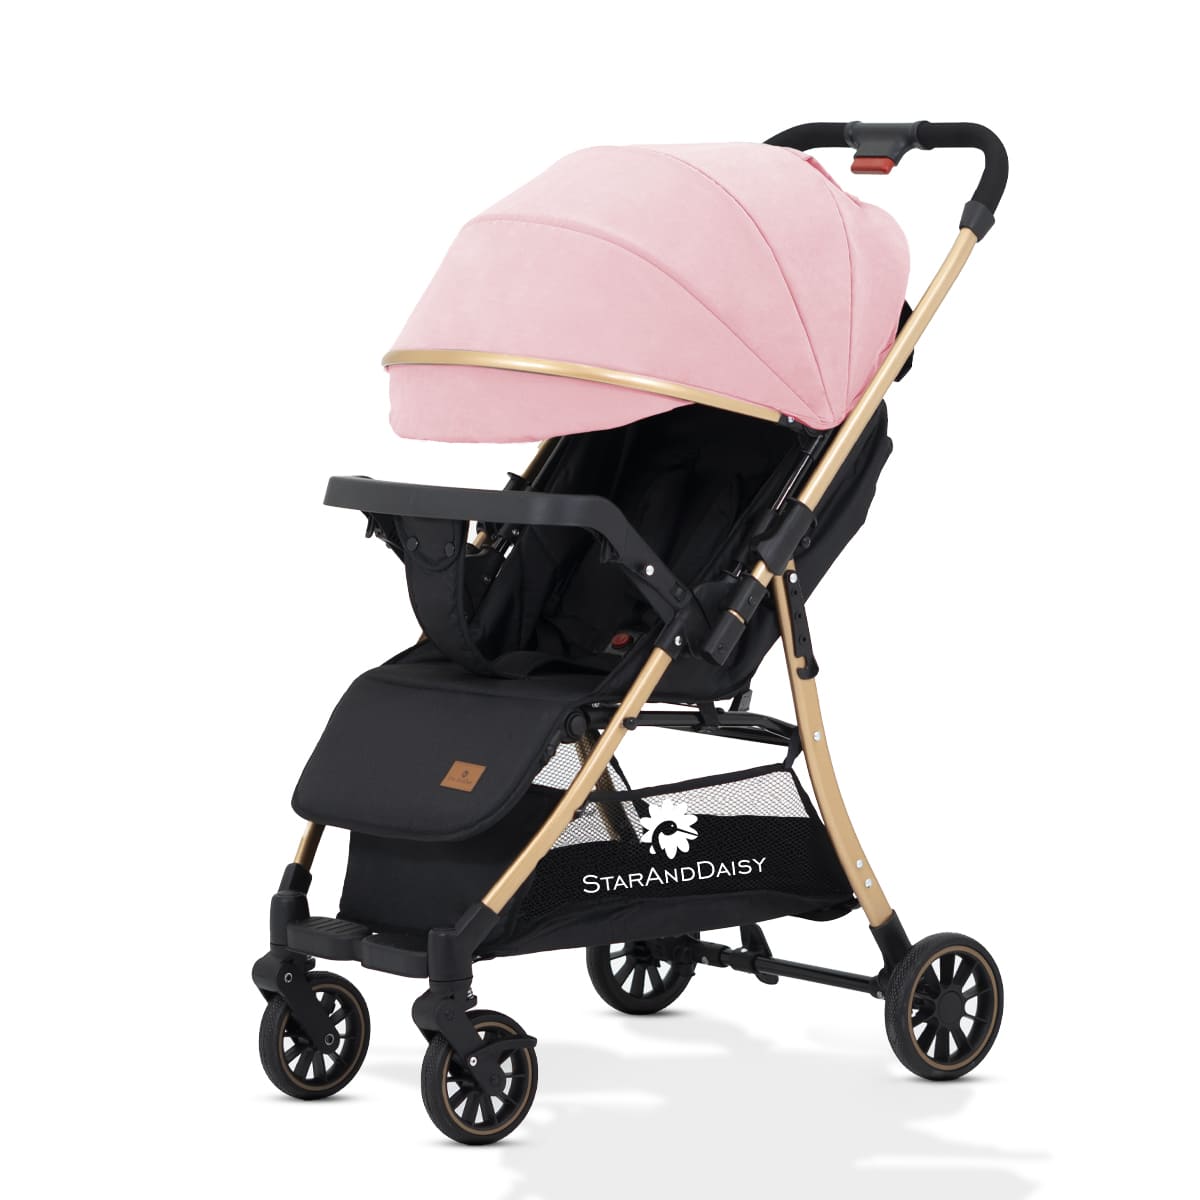 Lightweight Travel Baby Stroller - Convenient and Easy to Carry